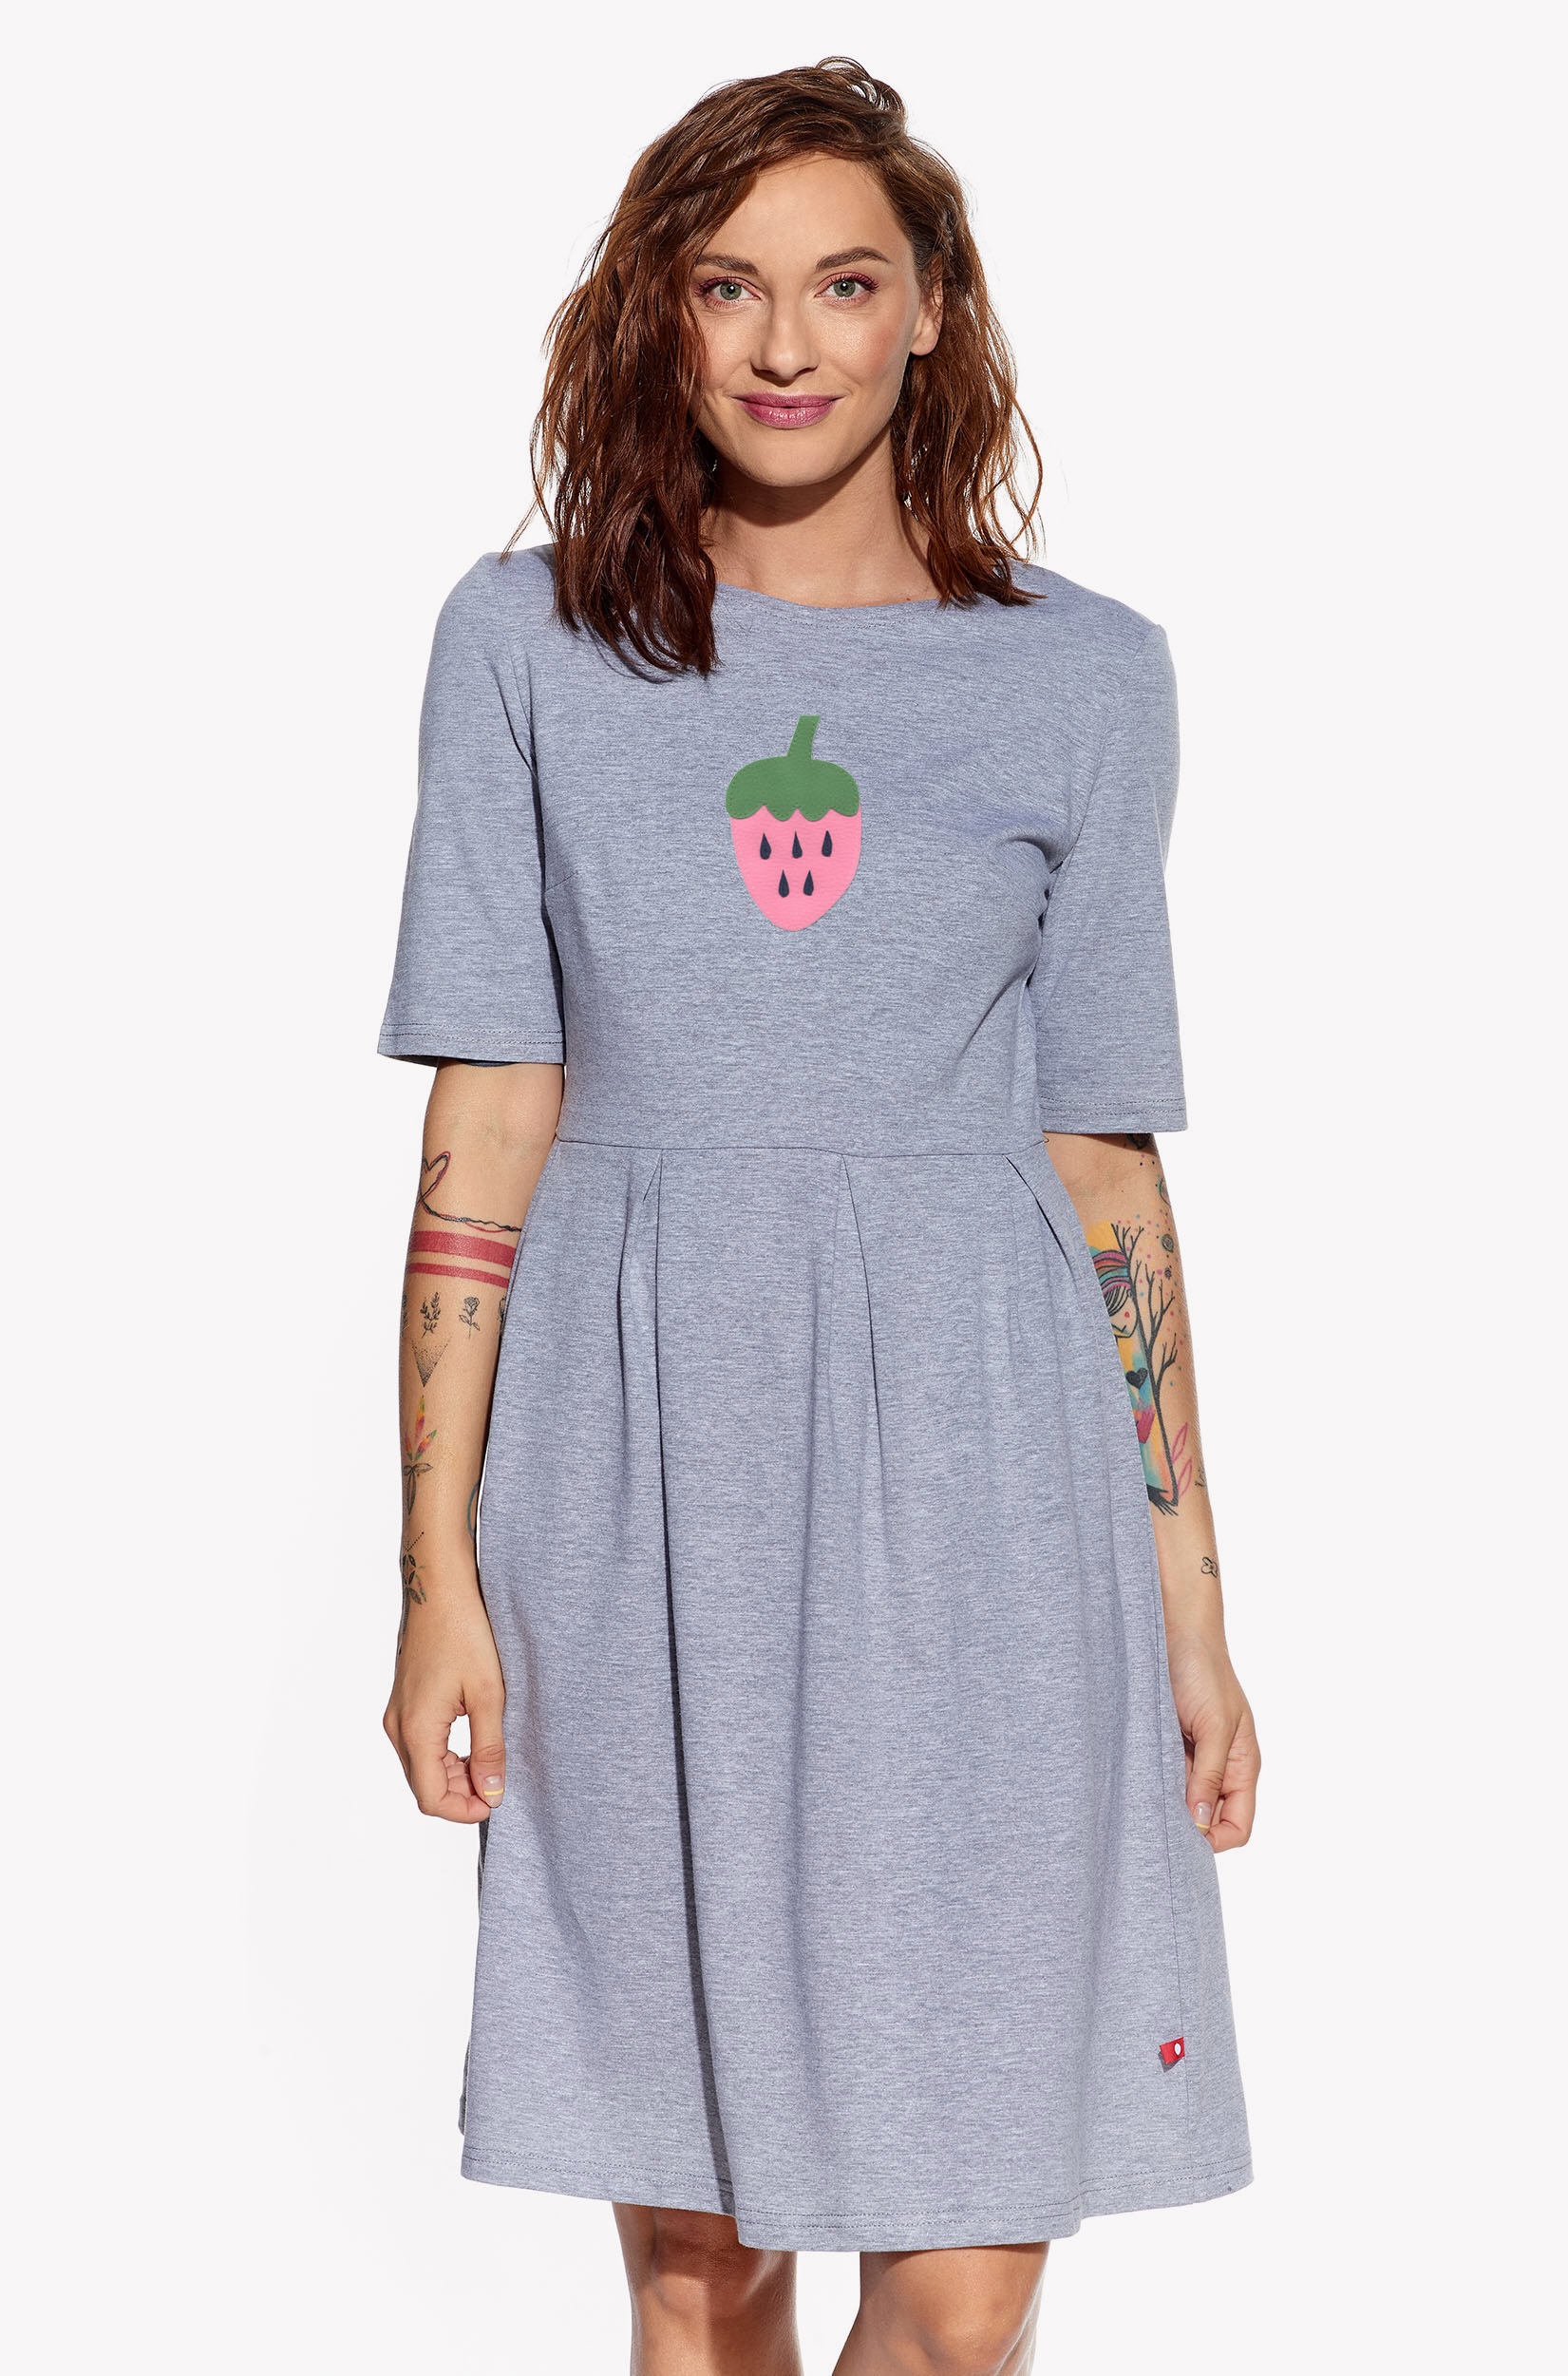 Dresses with strawberry